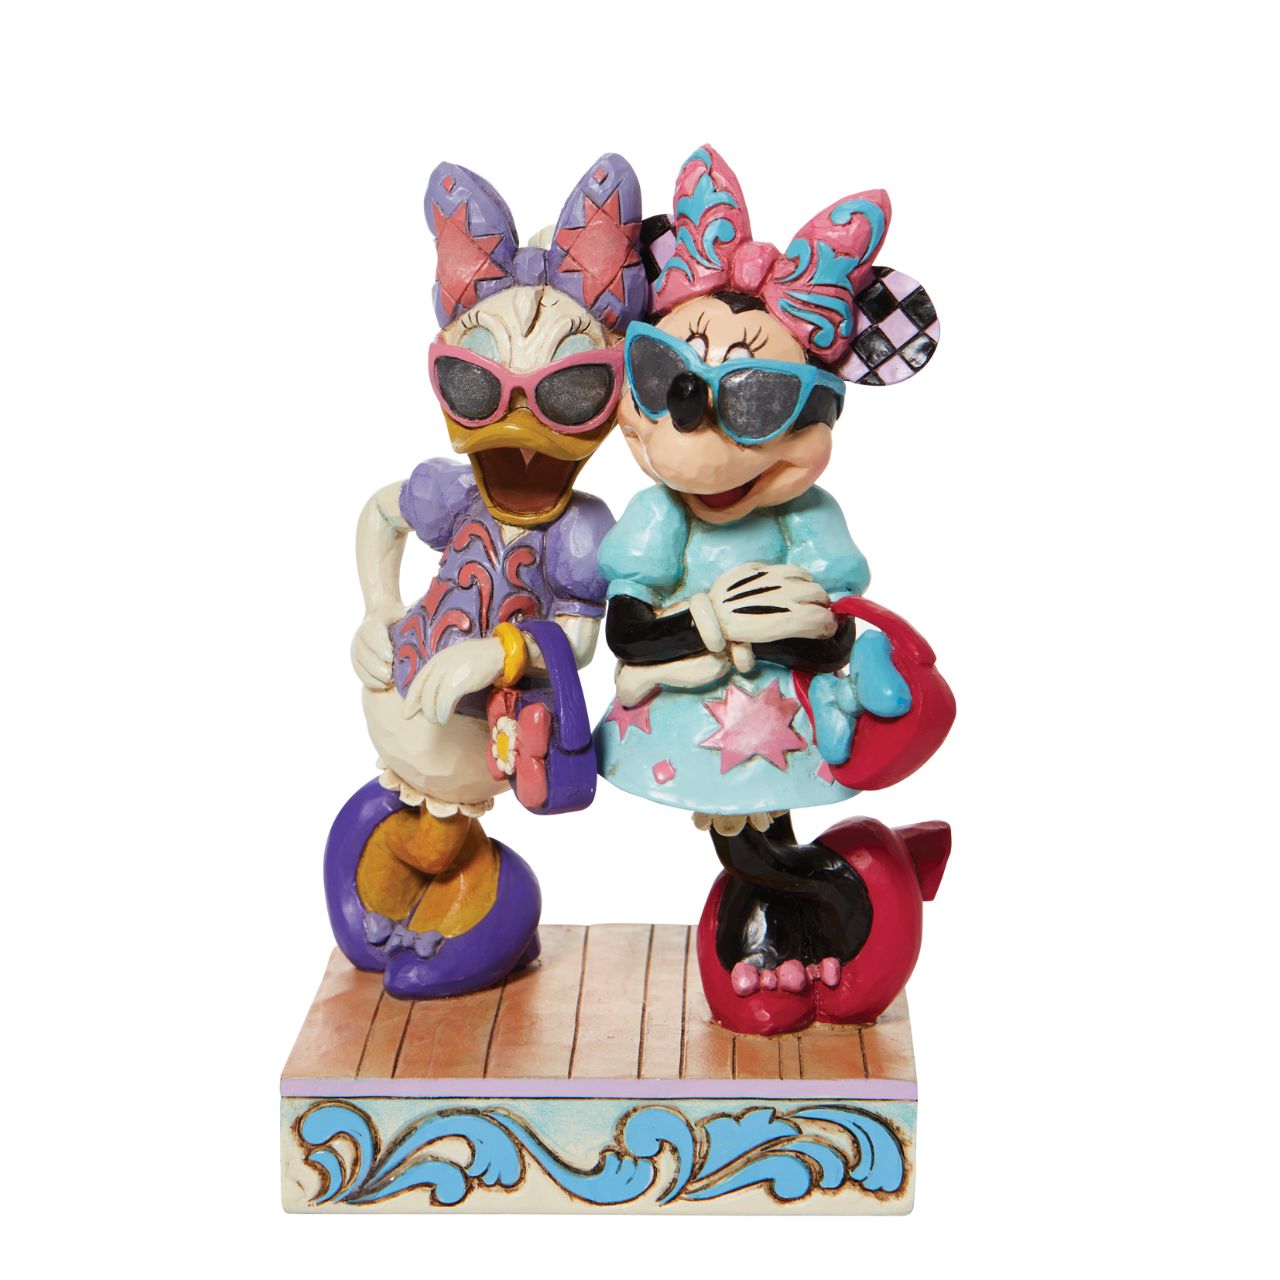 Disney "Fashionable Friends" Minnie and Daisy Figurine by Jim Shore  "Fashionable Friends" Mickey Mouse and Donald Duck would be nothing without their better and more fashionable halves! Minnie and Daisy don their finest duds to hit the town in style. Wearing shades, bows, matching purses and high heels, these ladies strike a power pose.